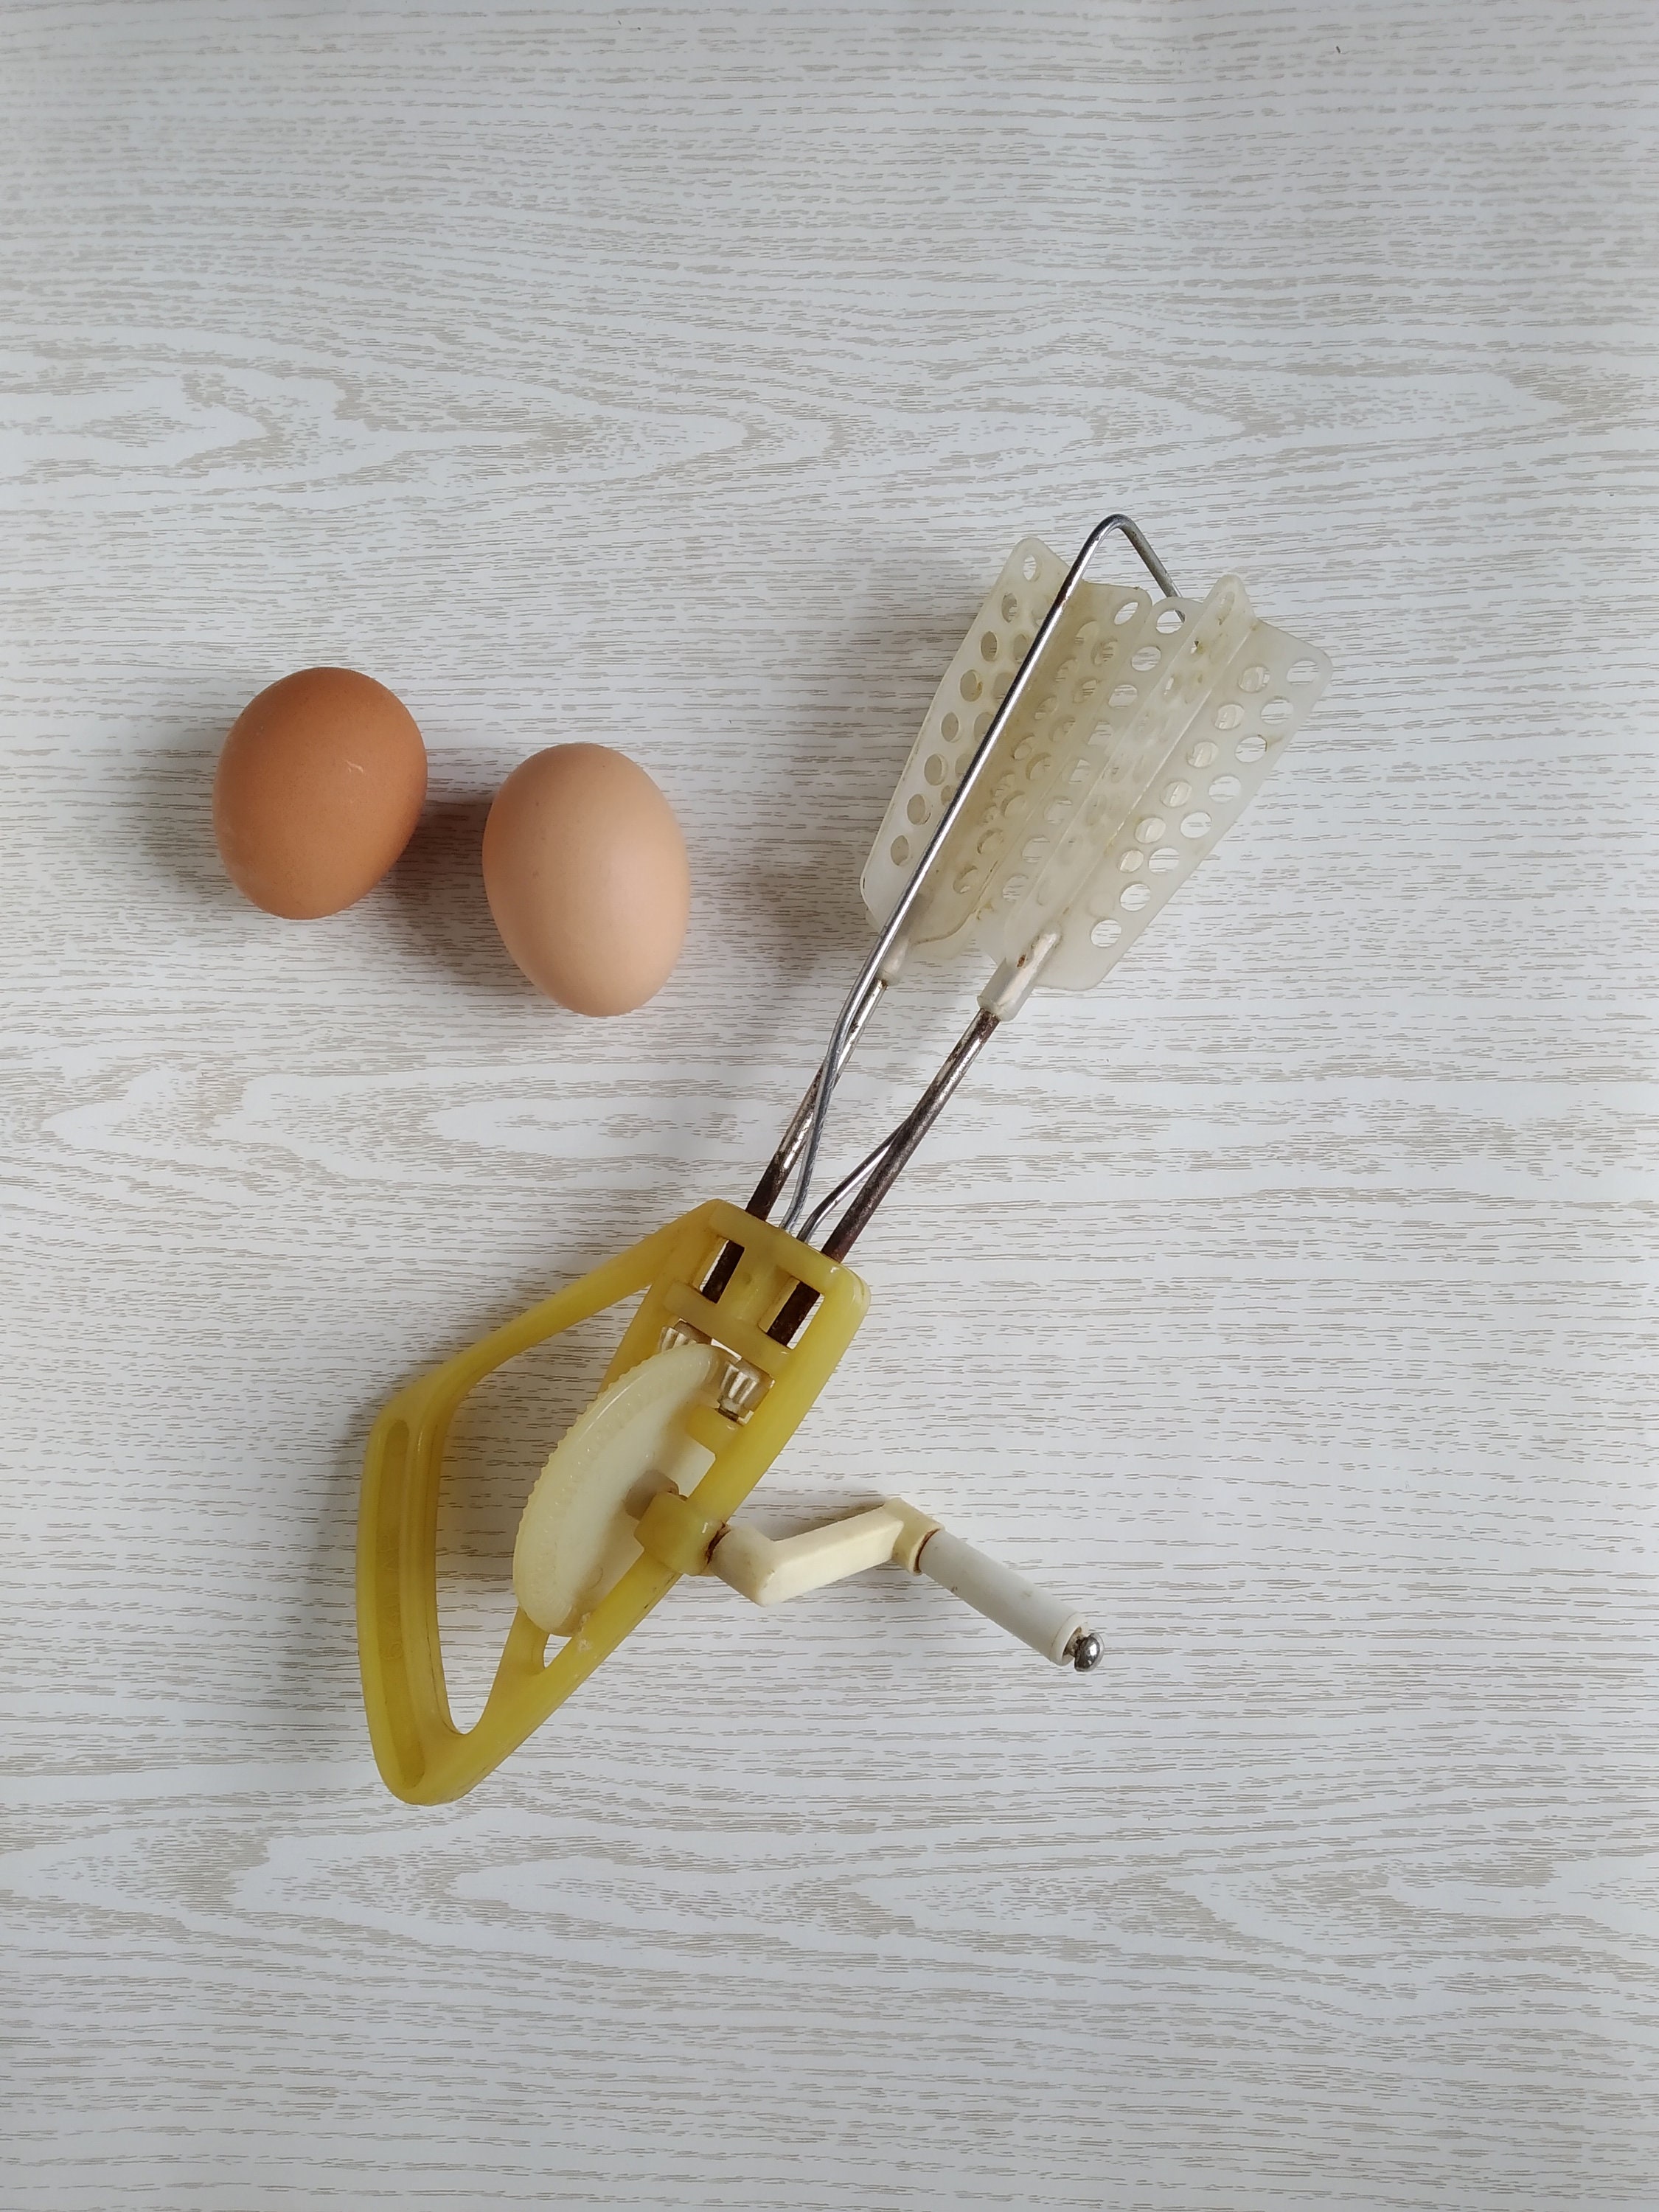 Review for Hand Whisk Rotary Egg Beater! 